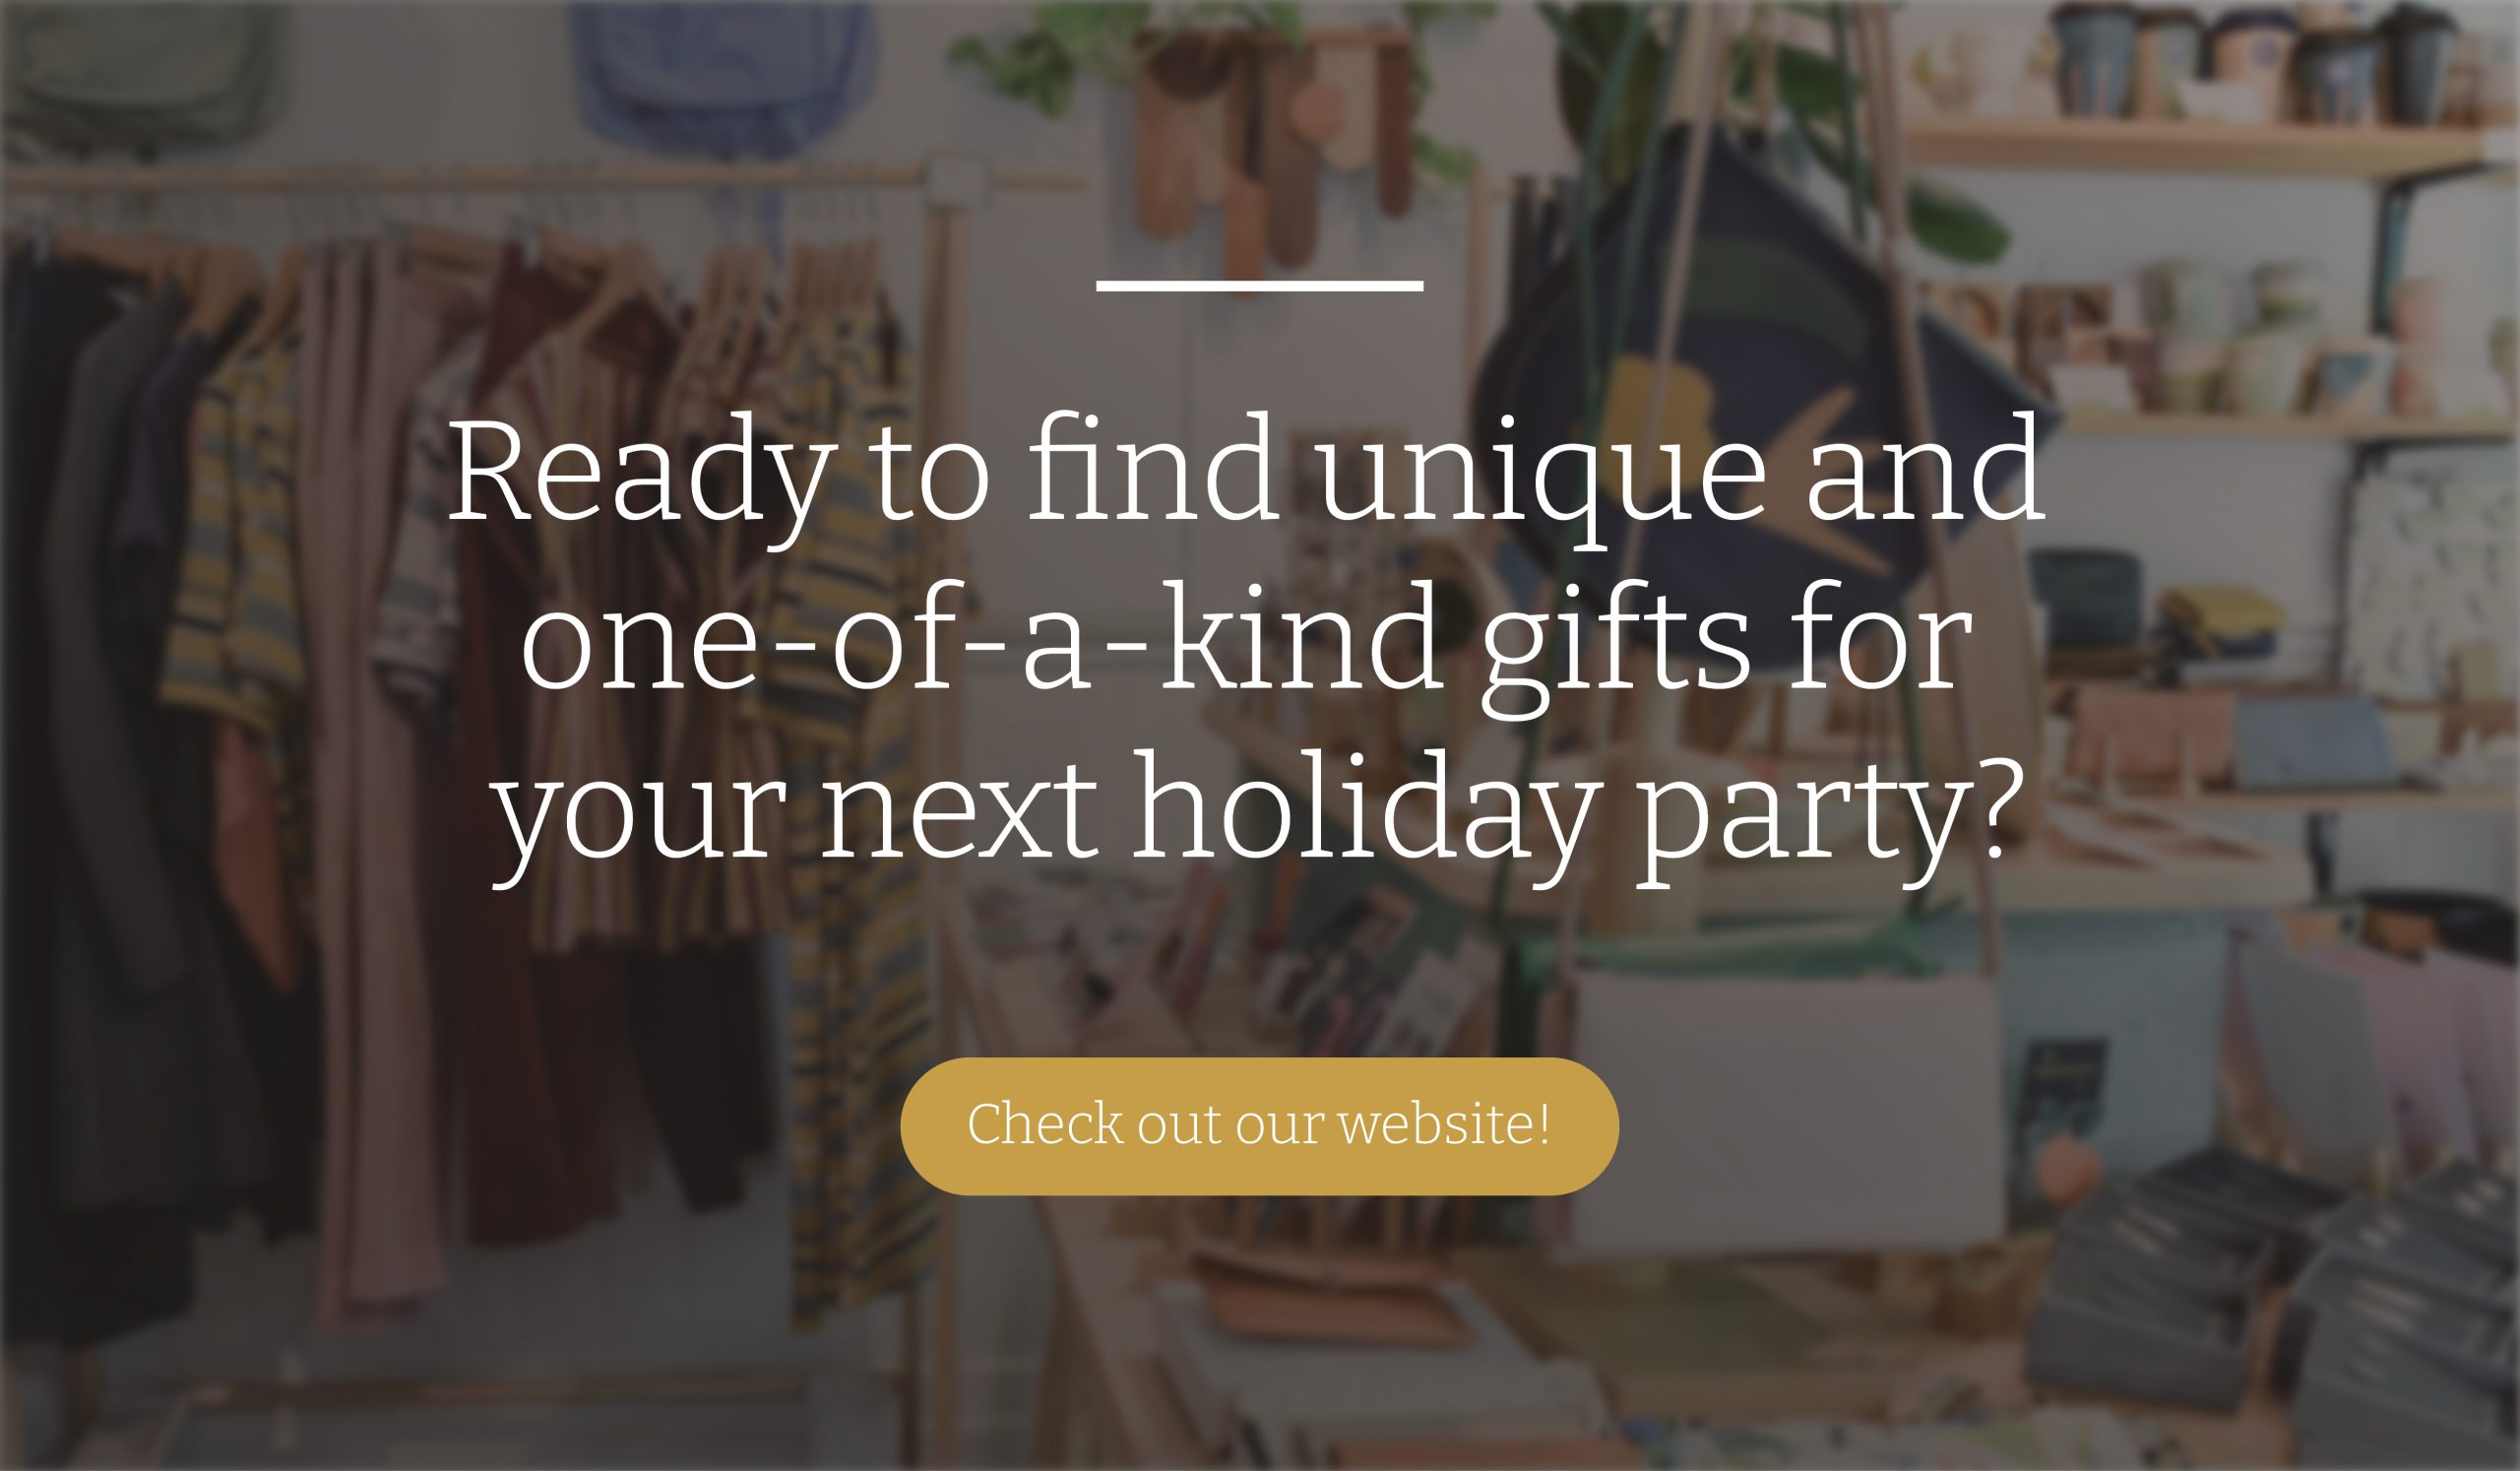 Ready to find unique and one-of-a-kind gifts for your next holiday party? Check out our website!